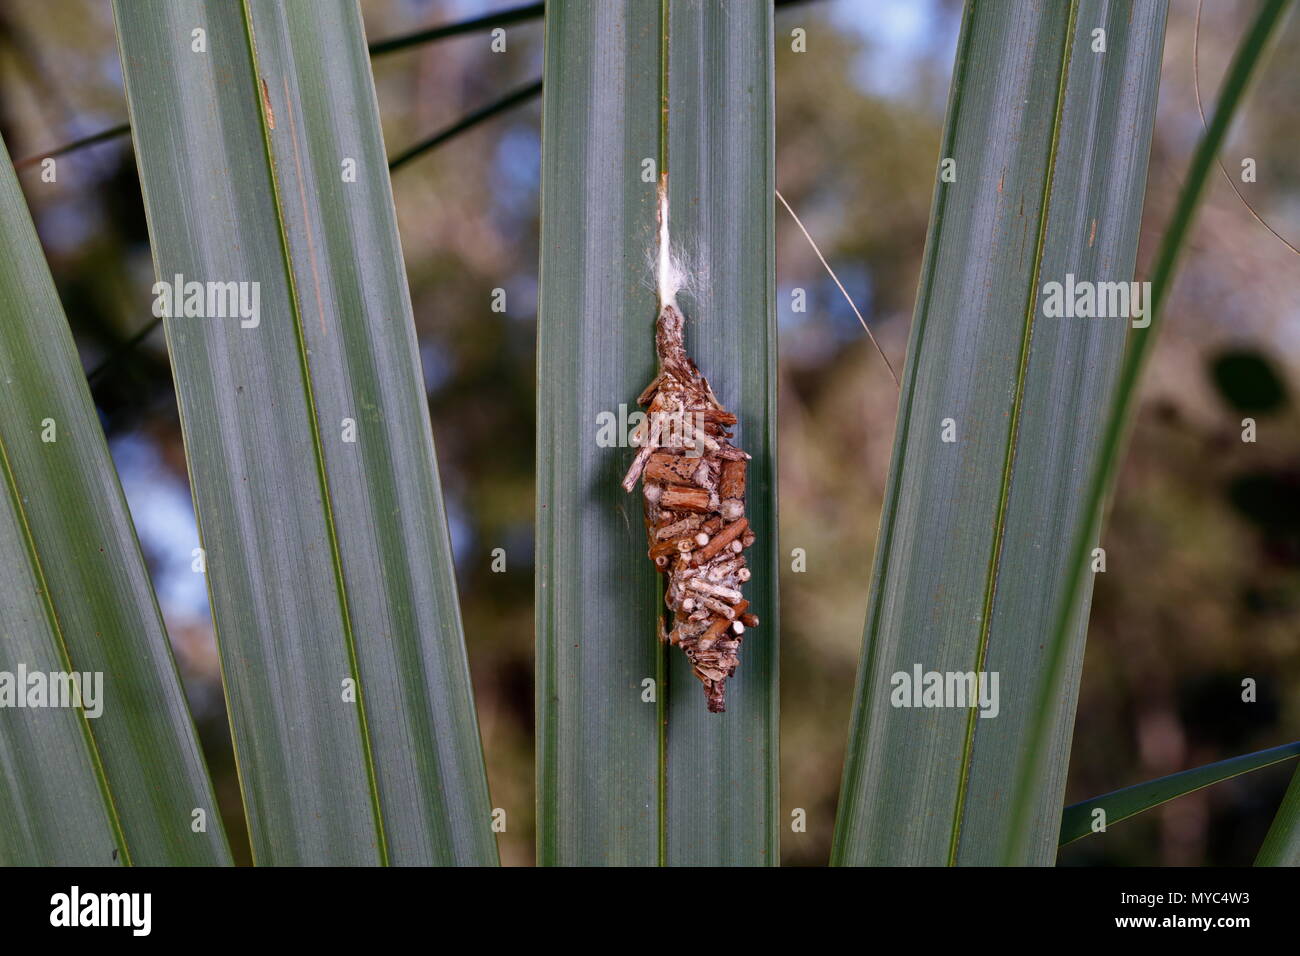 A Psychidae, bagworm moth, case containing a caterpillar on a palm frond. Stock Photo